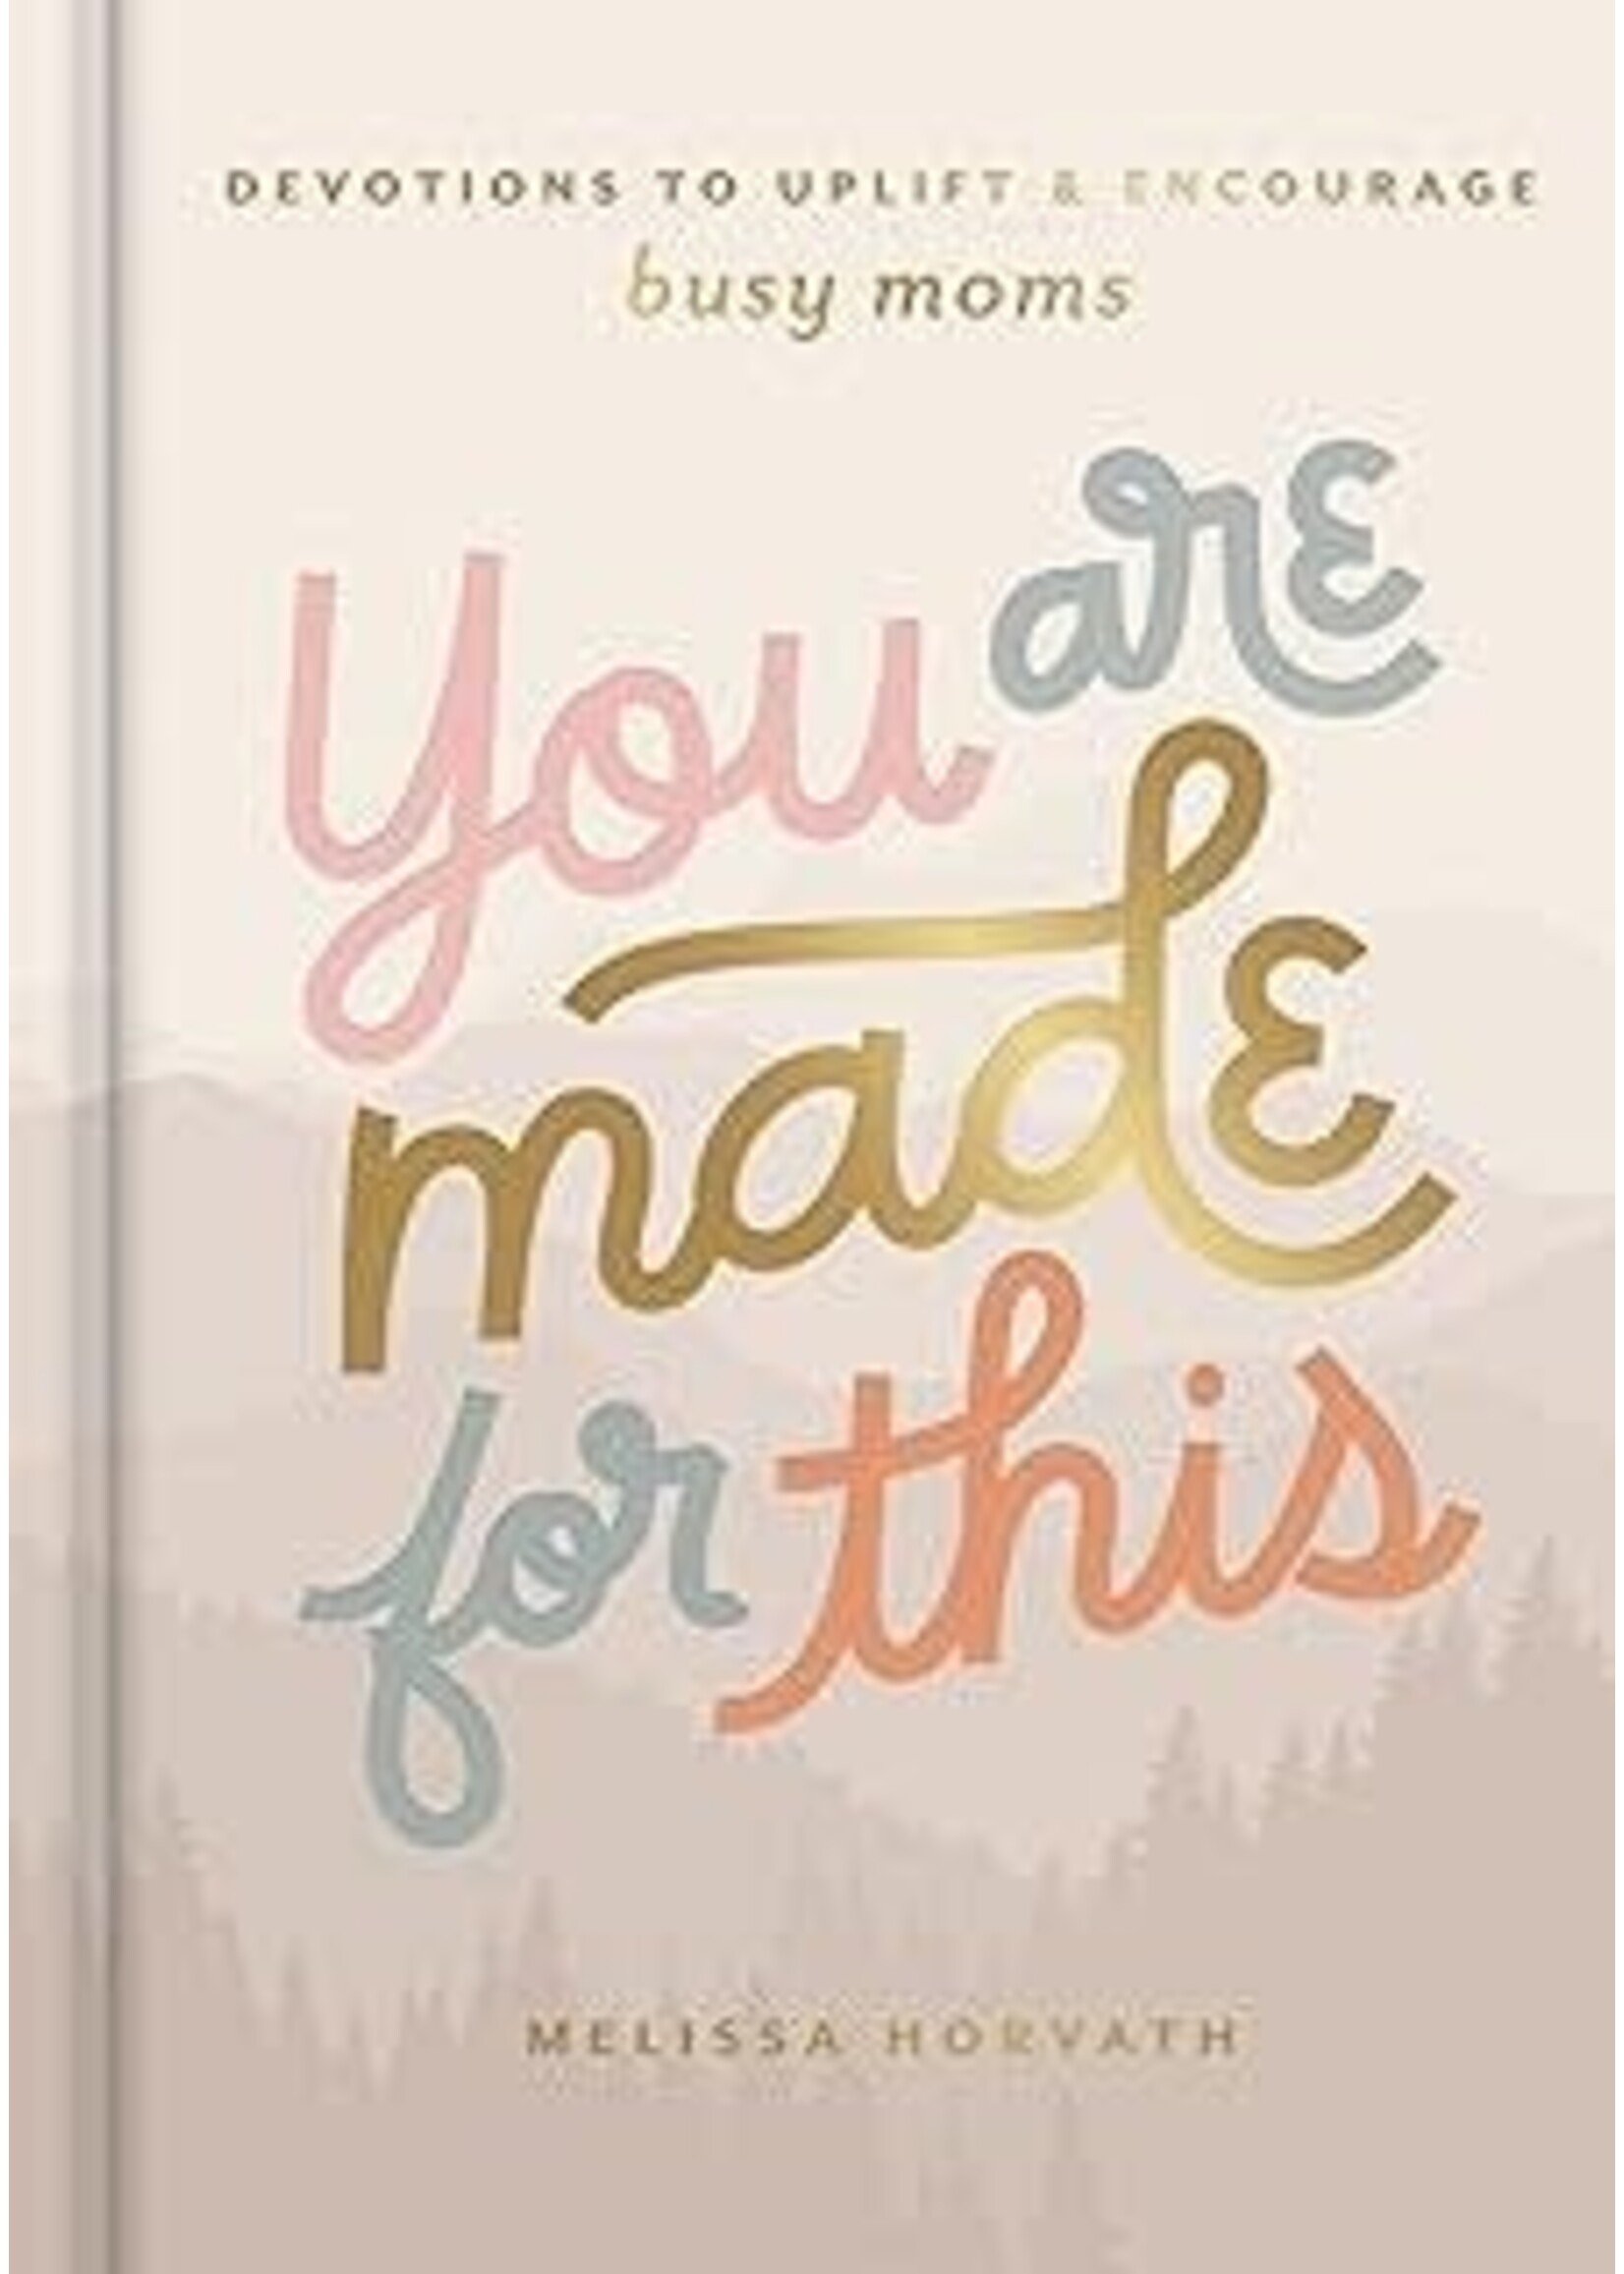 You are Made for This